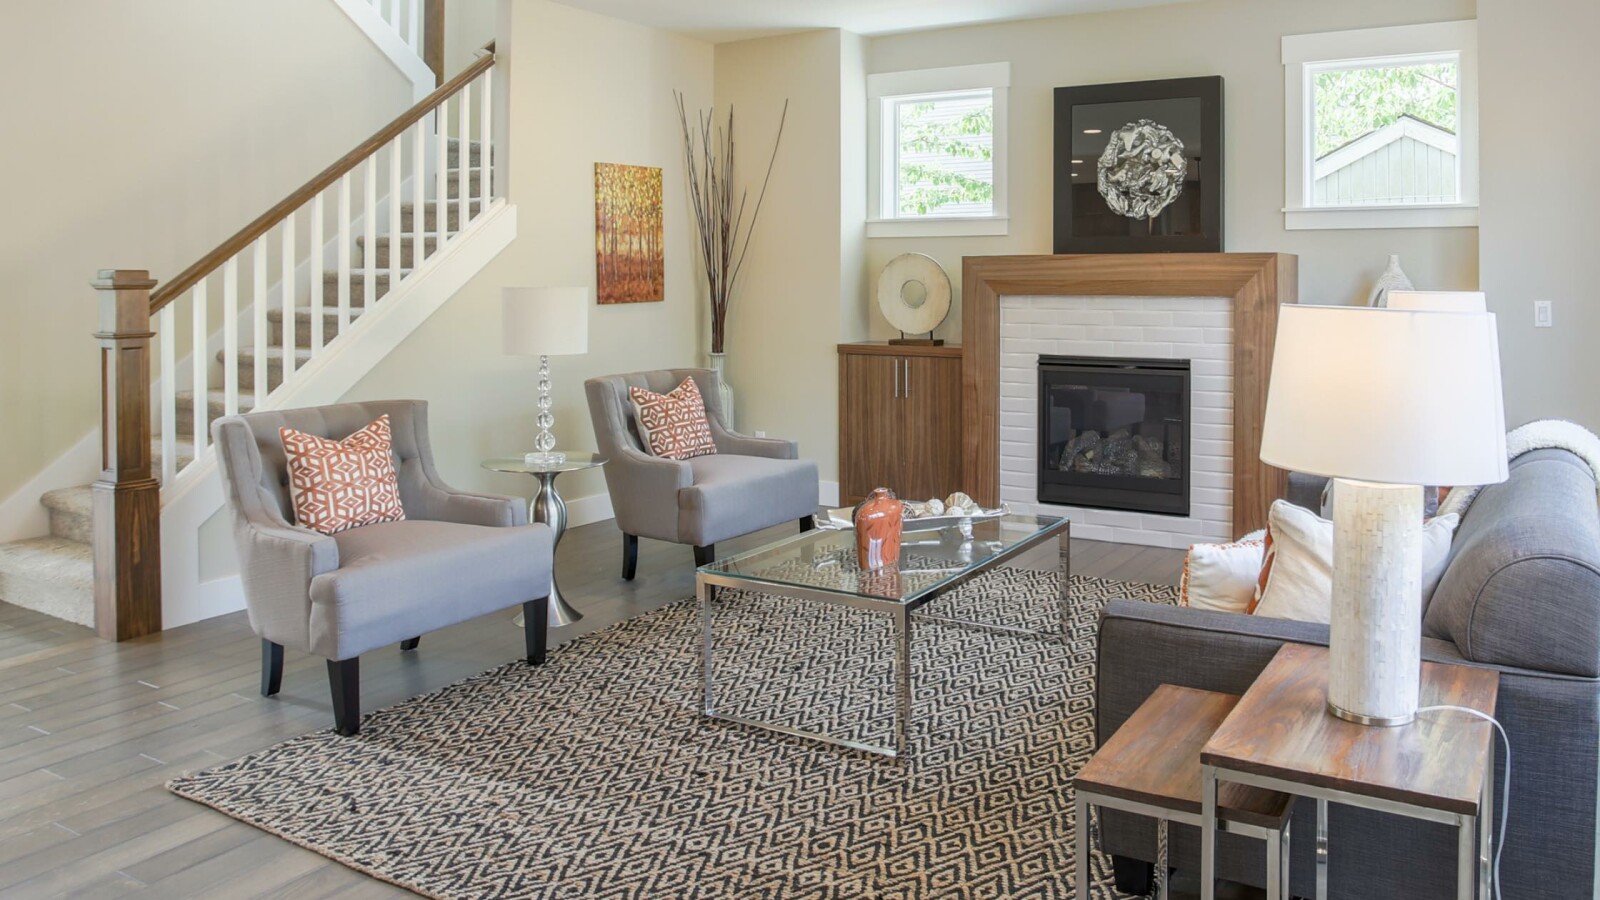 Rugs on Carpet: Major Faux Pas or Total Home Upgrade?